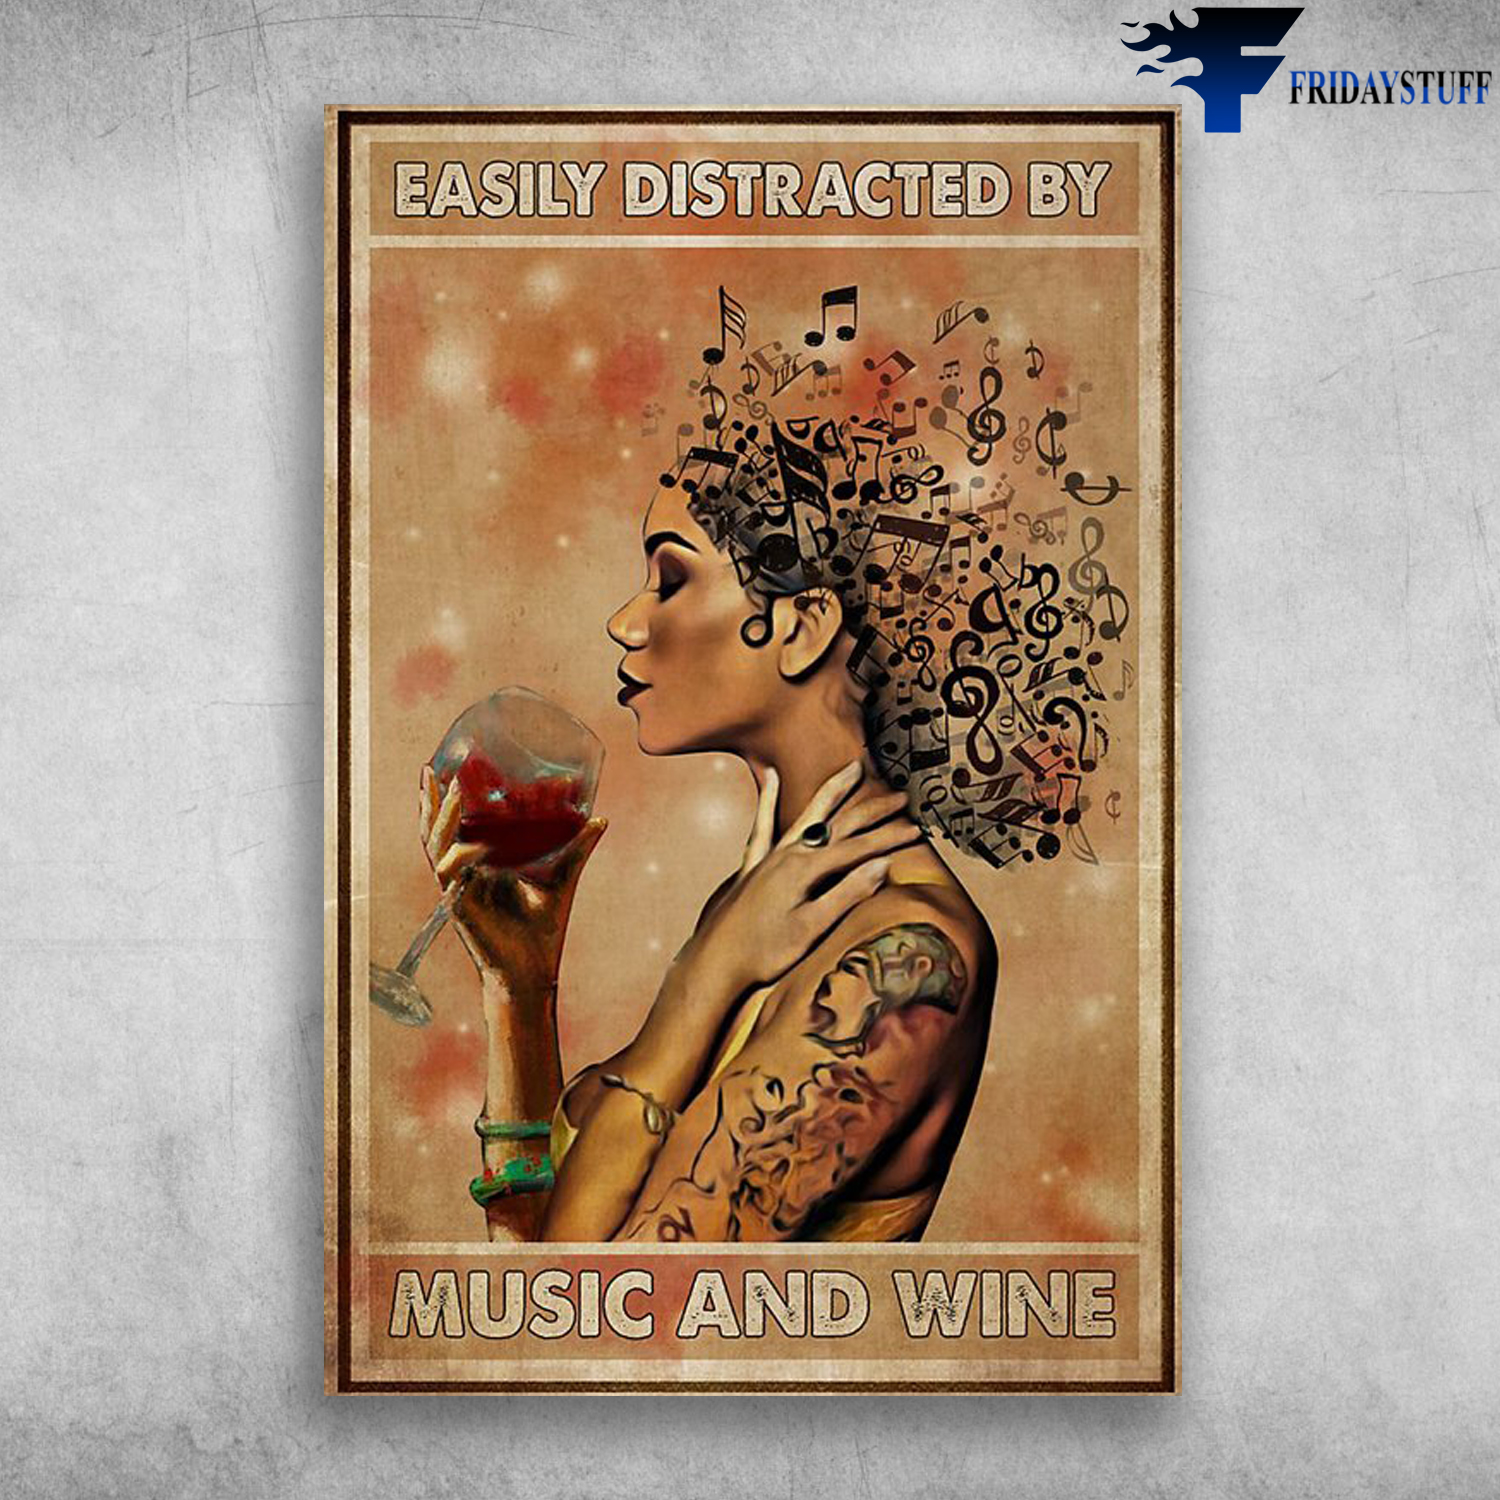 Girl Drinks Wine And Listens Music - Easily Distracted By Music And Wine